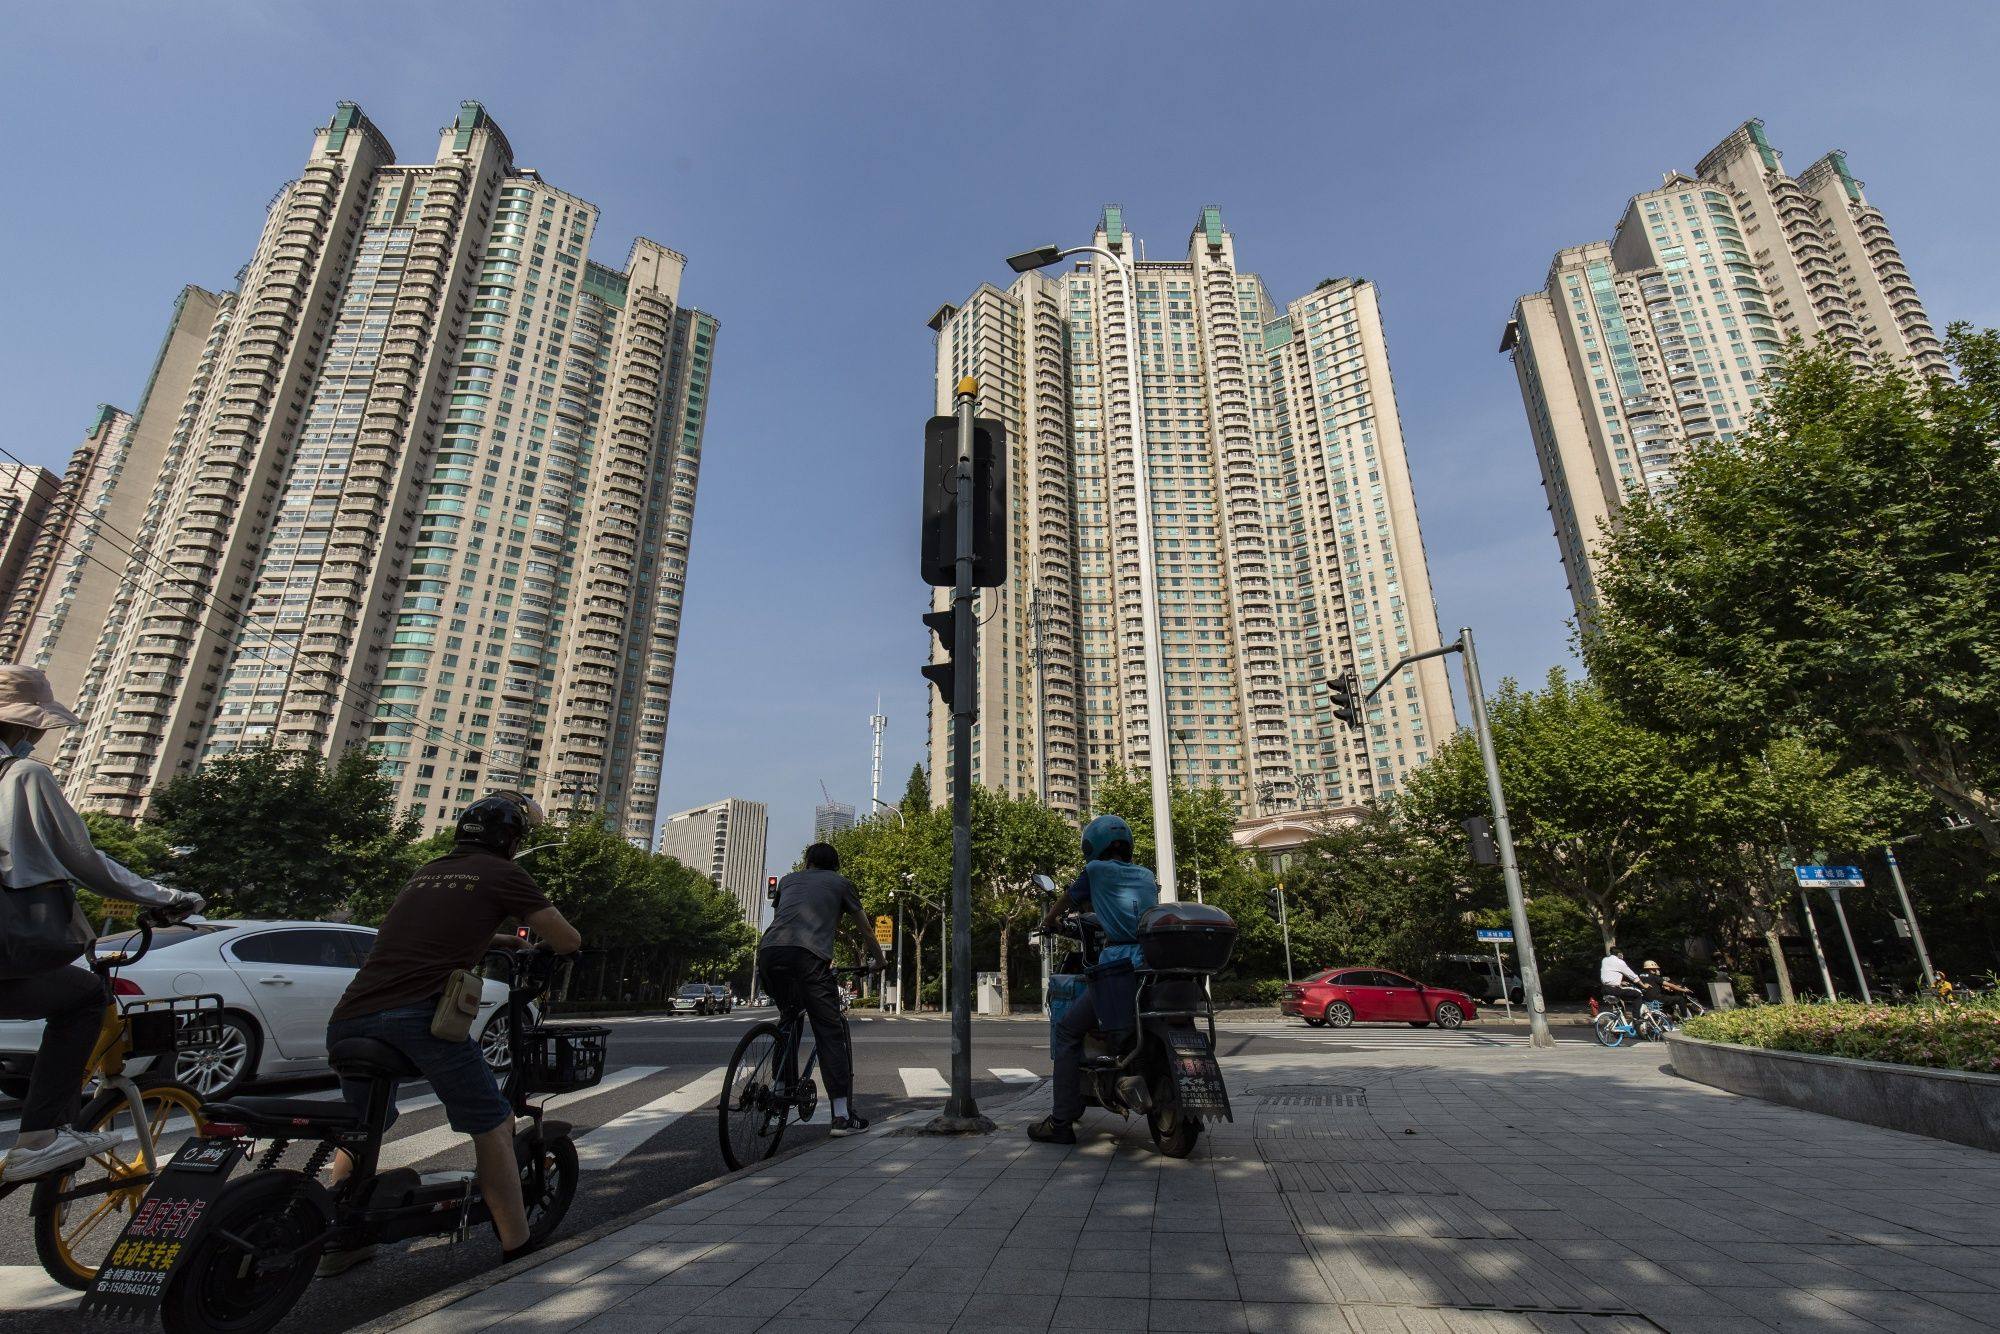 The Riviera Garden residential property developed by Shimao Group Holdings in Shanghai, pictured on July 14, 2022. Photo: Bloomberg